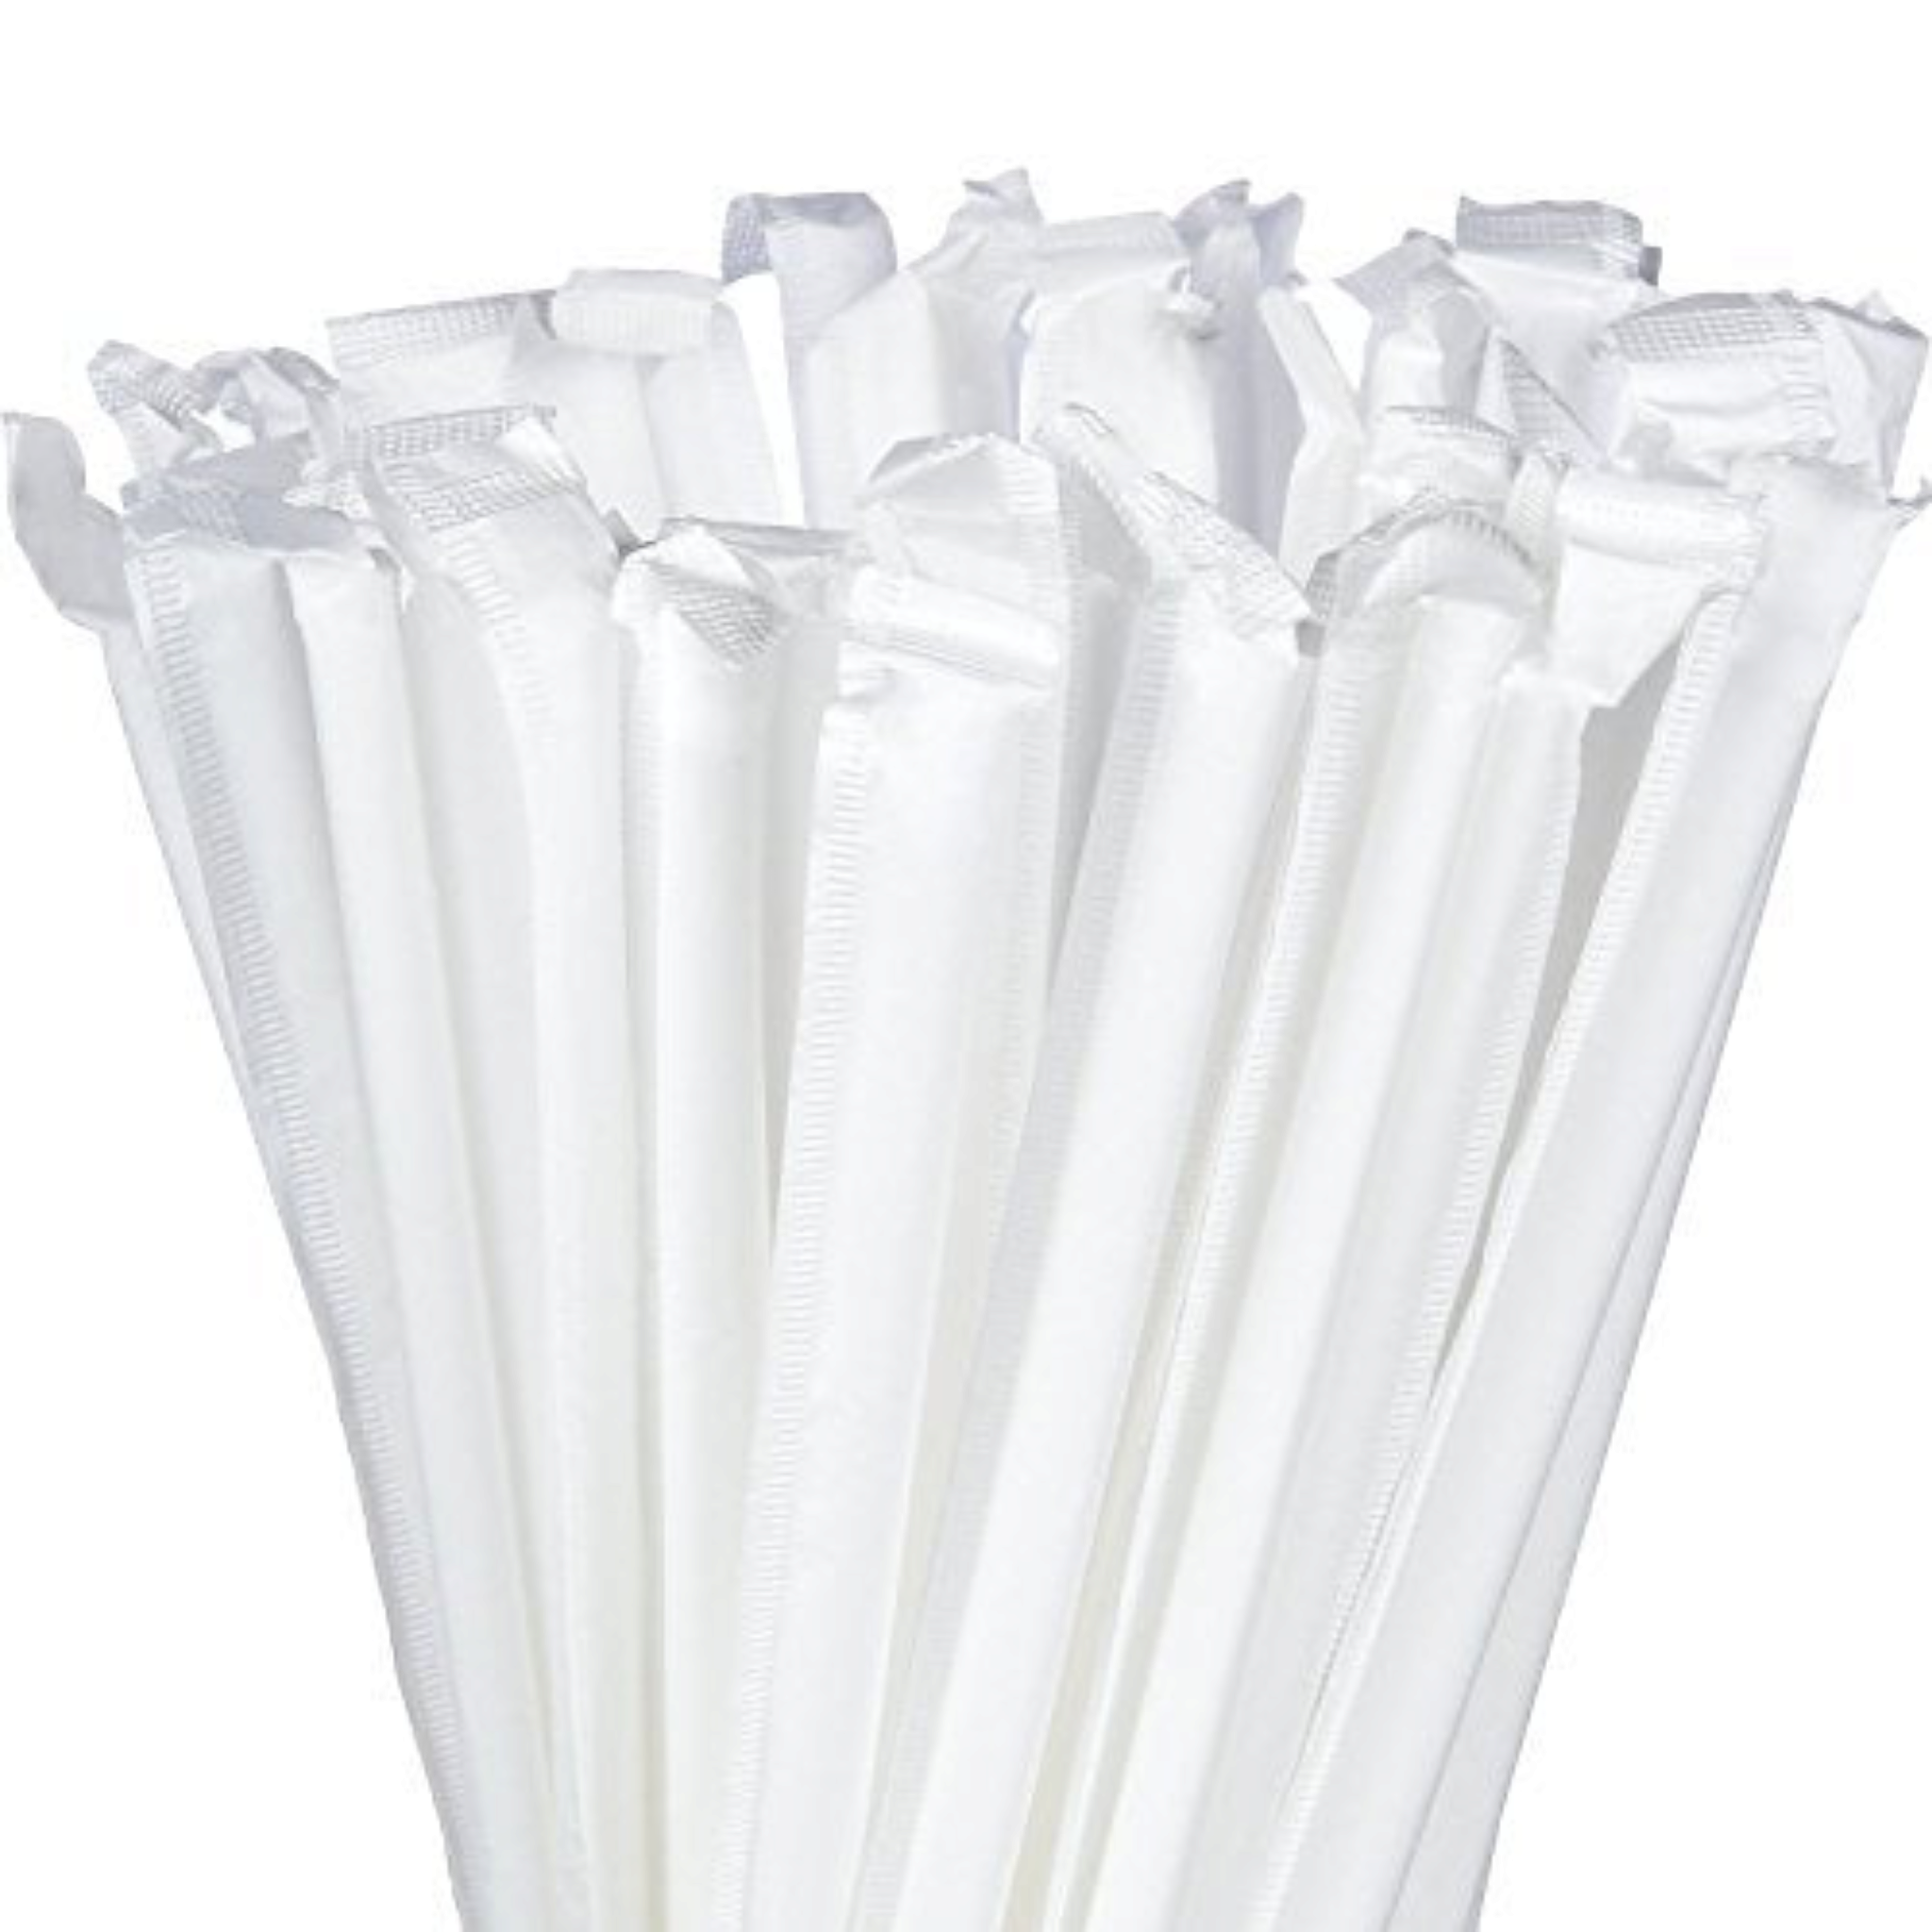 8mm Plastic Straws Wrapped Triple Thick 1000pack